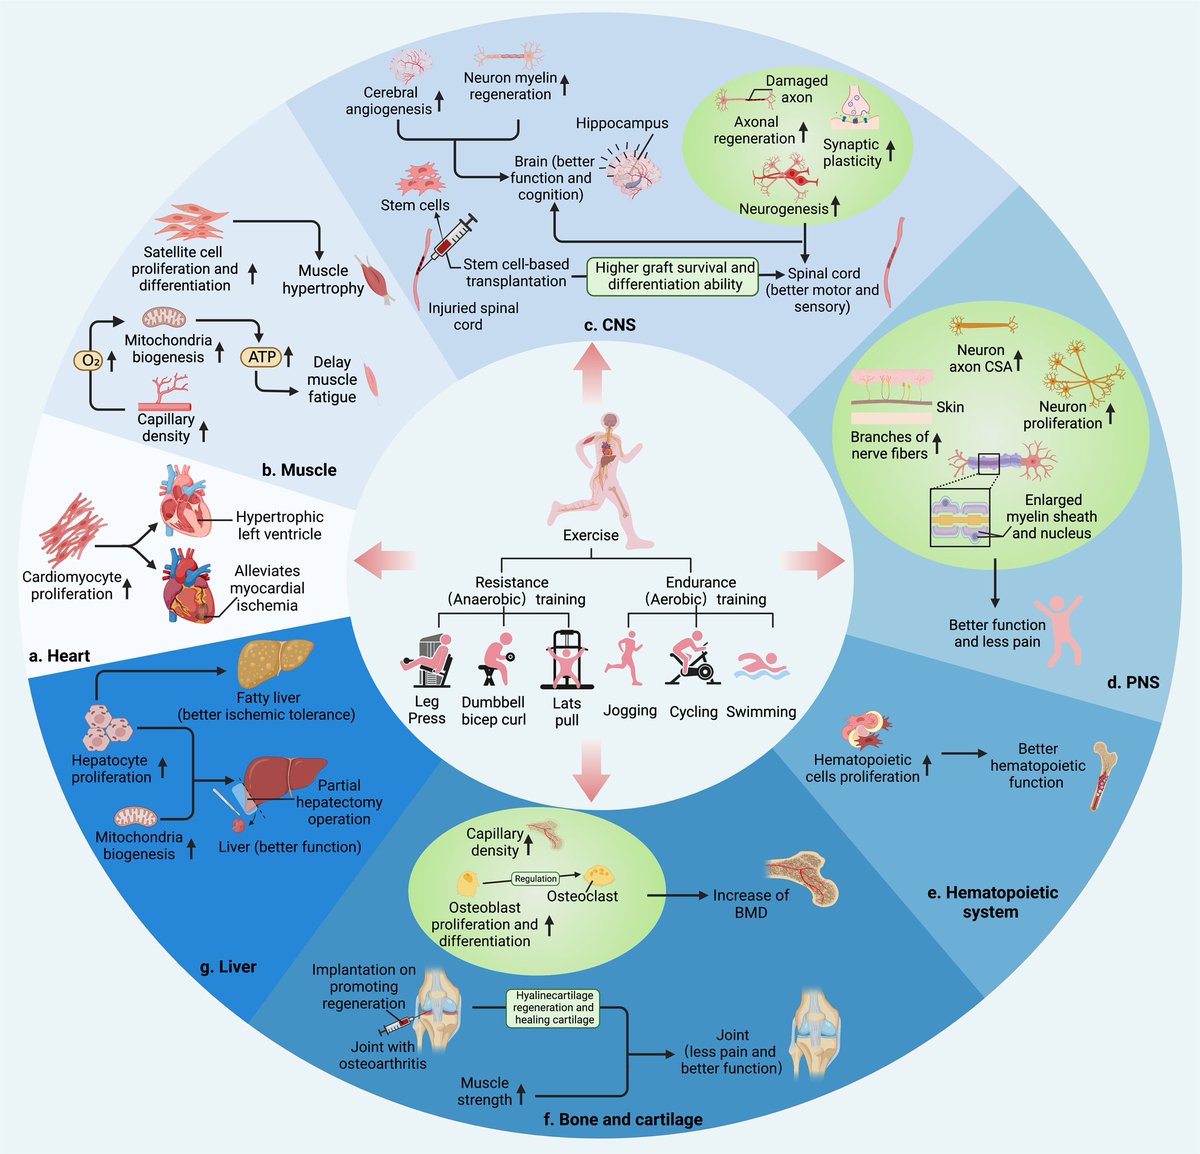 This review investigates the benefits of exercise on tissue regeneration in diverse organs, mainly focusing on musculoskeletal system, cardiovascular system, and nervous system, while discussing the underlying molecular mechanisms and emerging therapeutic exercise mimetics.